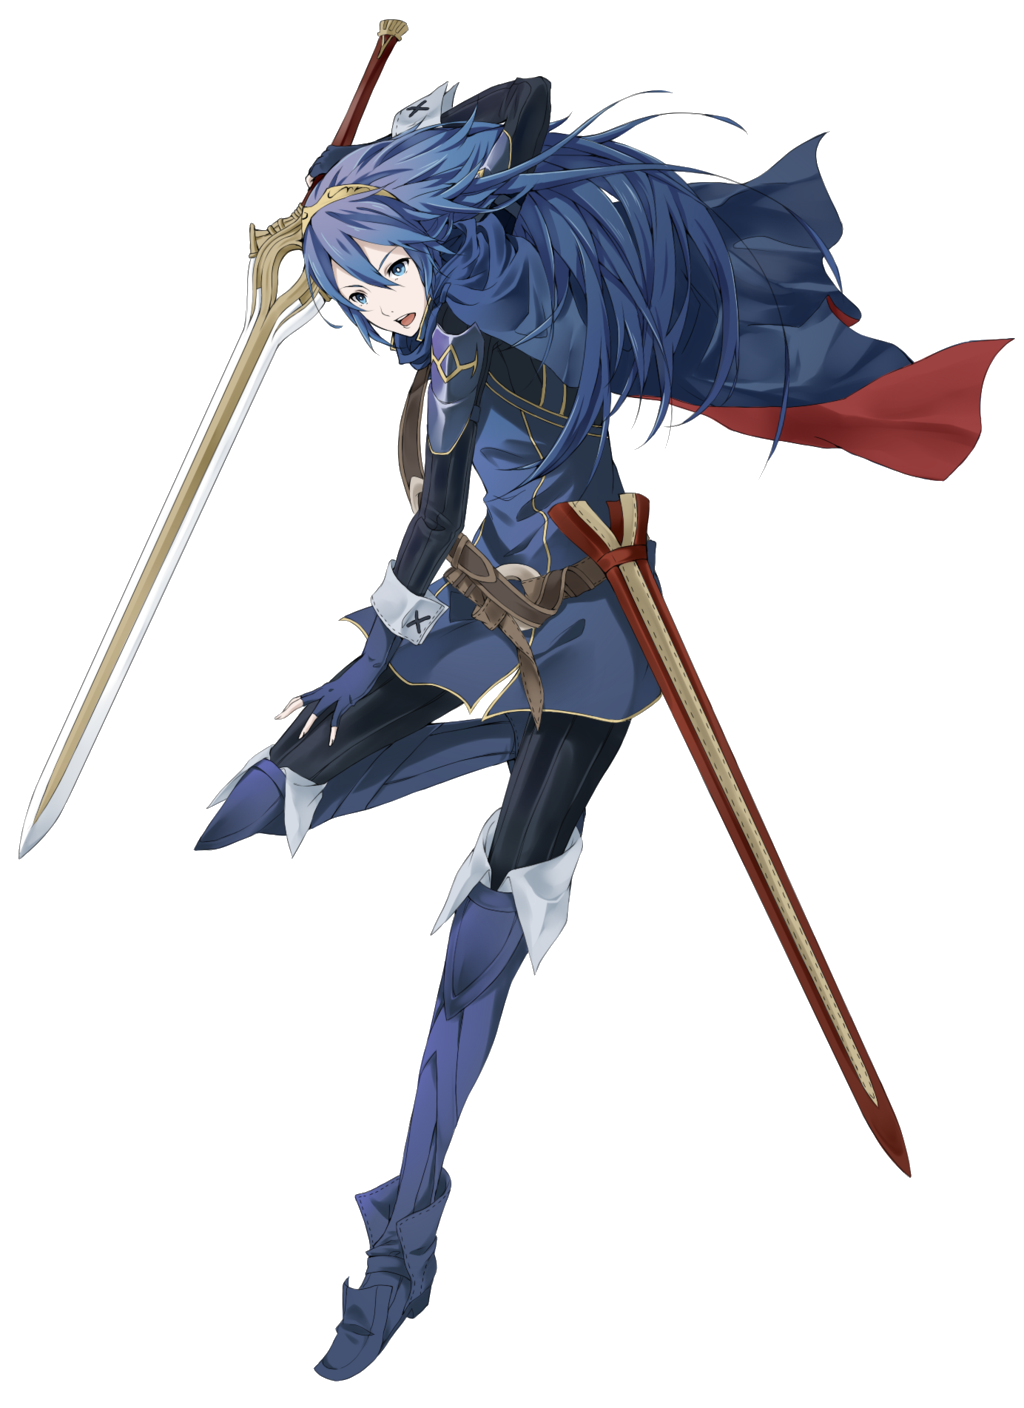 Lucina~   - The Independent Video Game Community